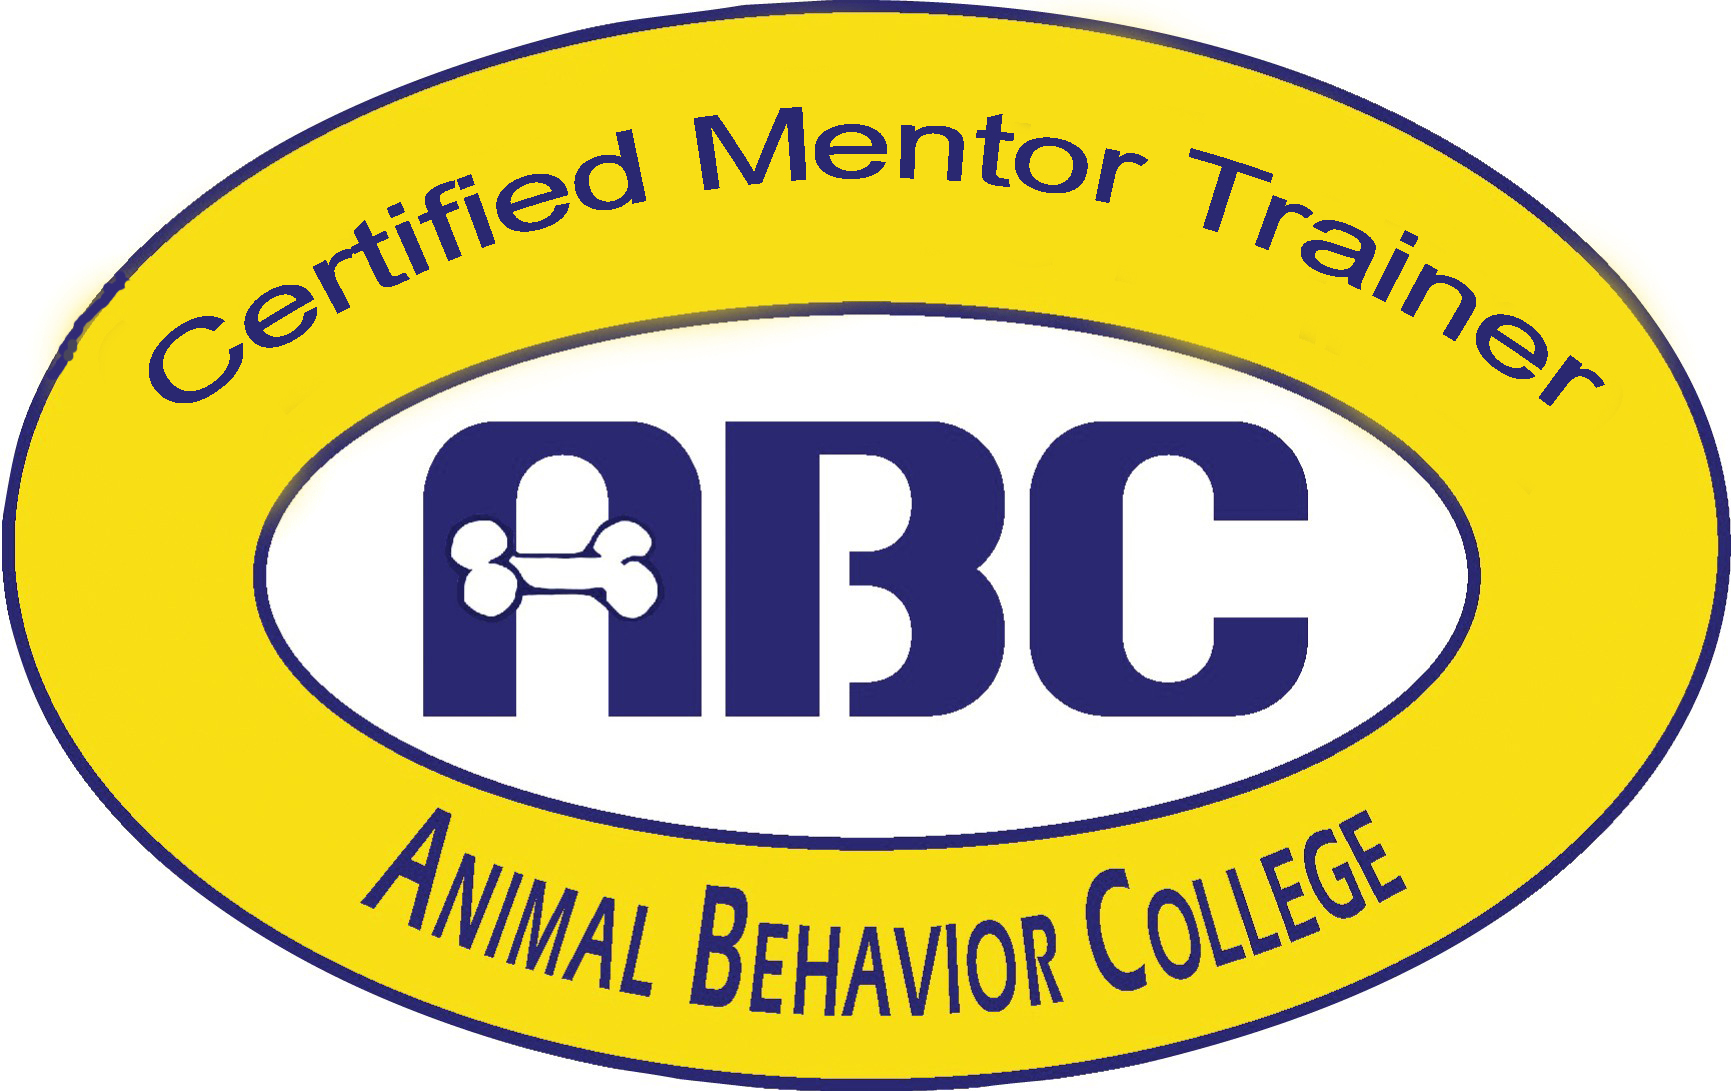 Certified Mentor Trainer ABC